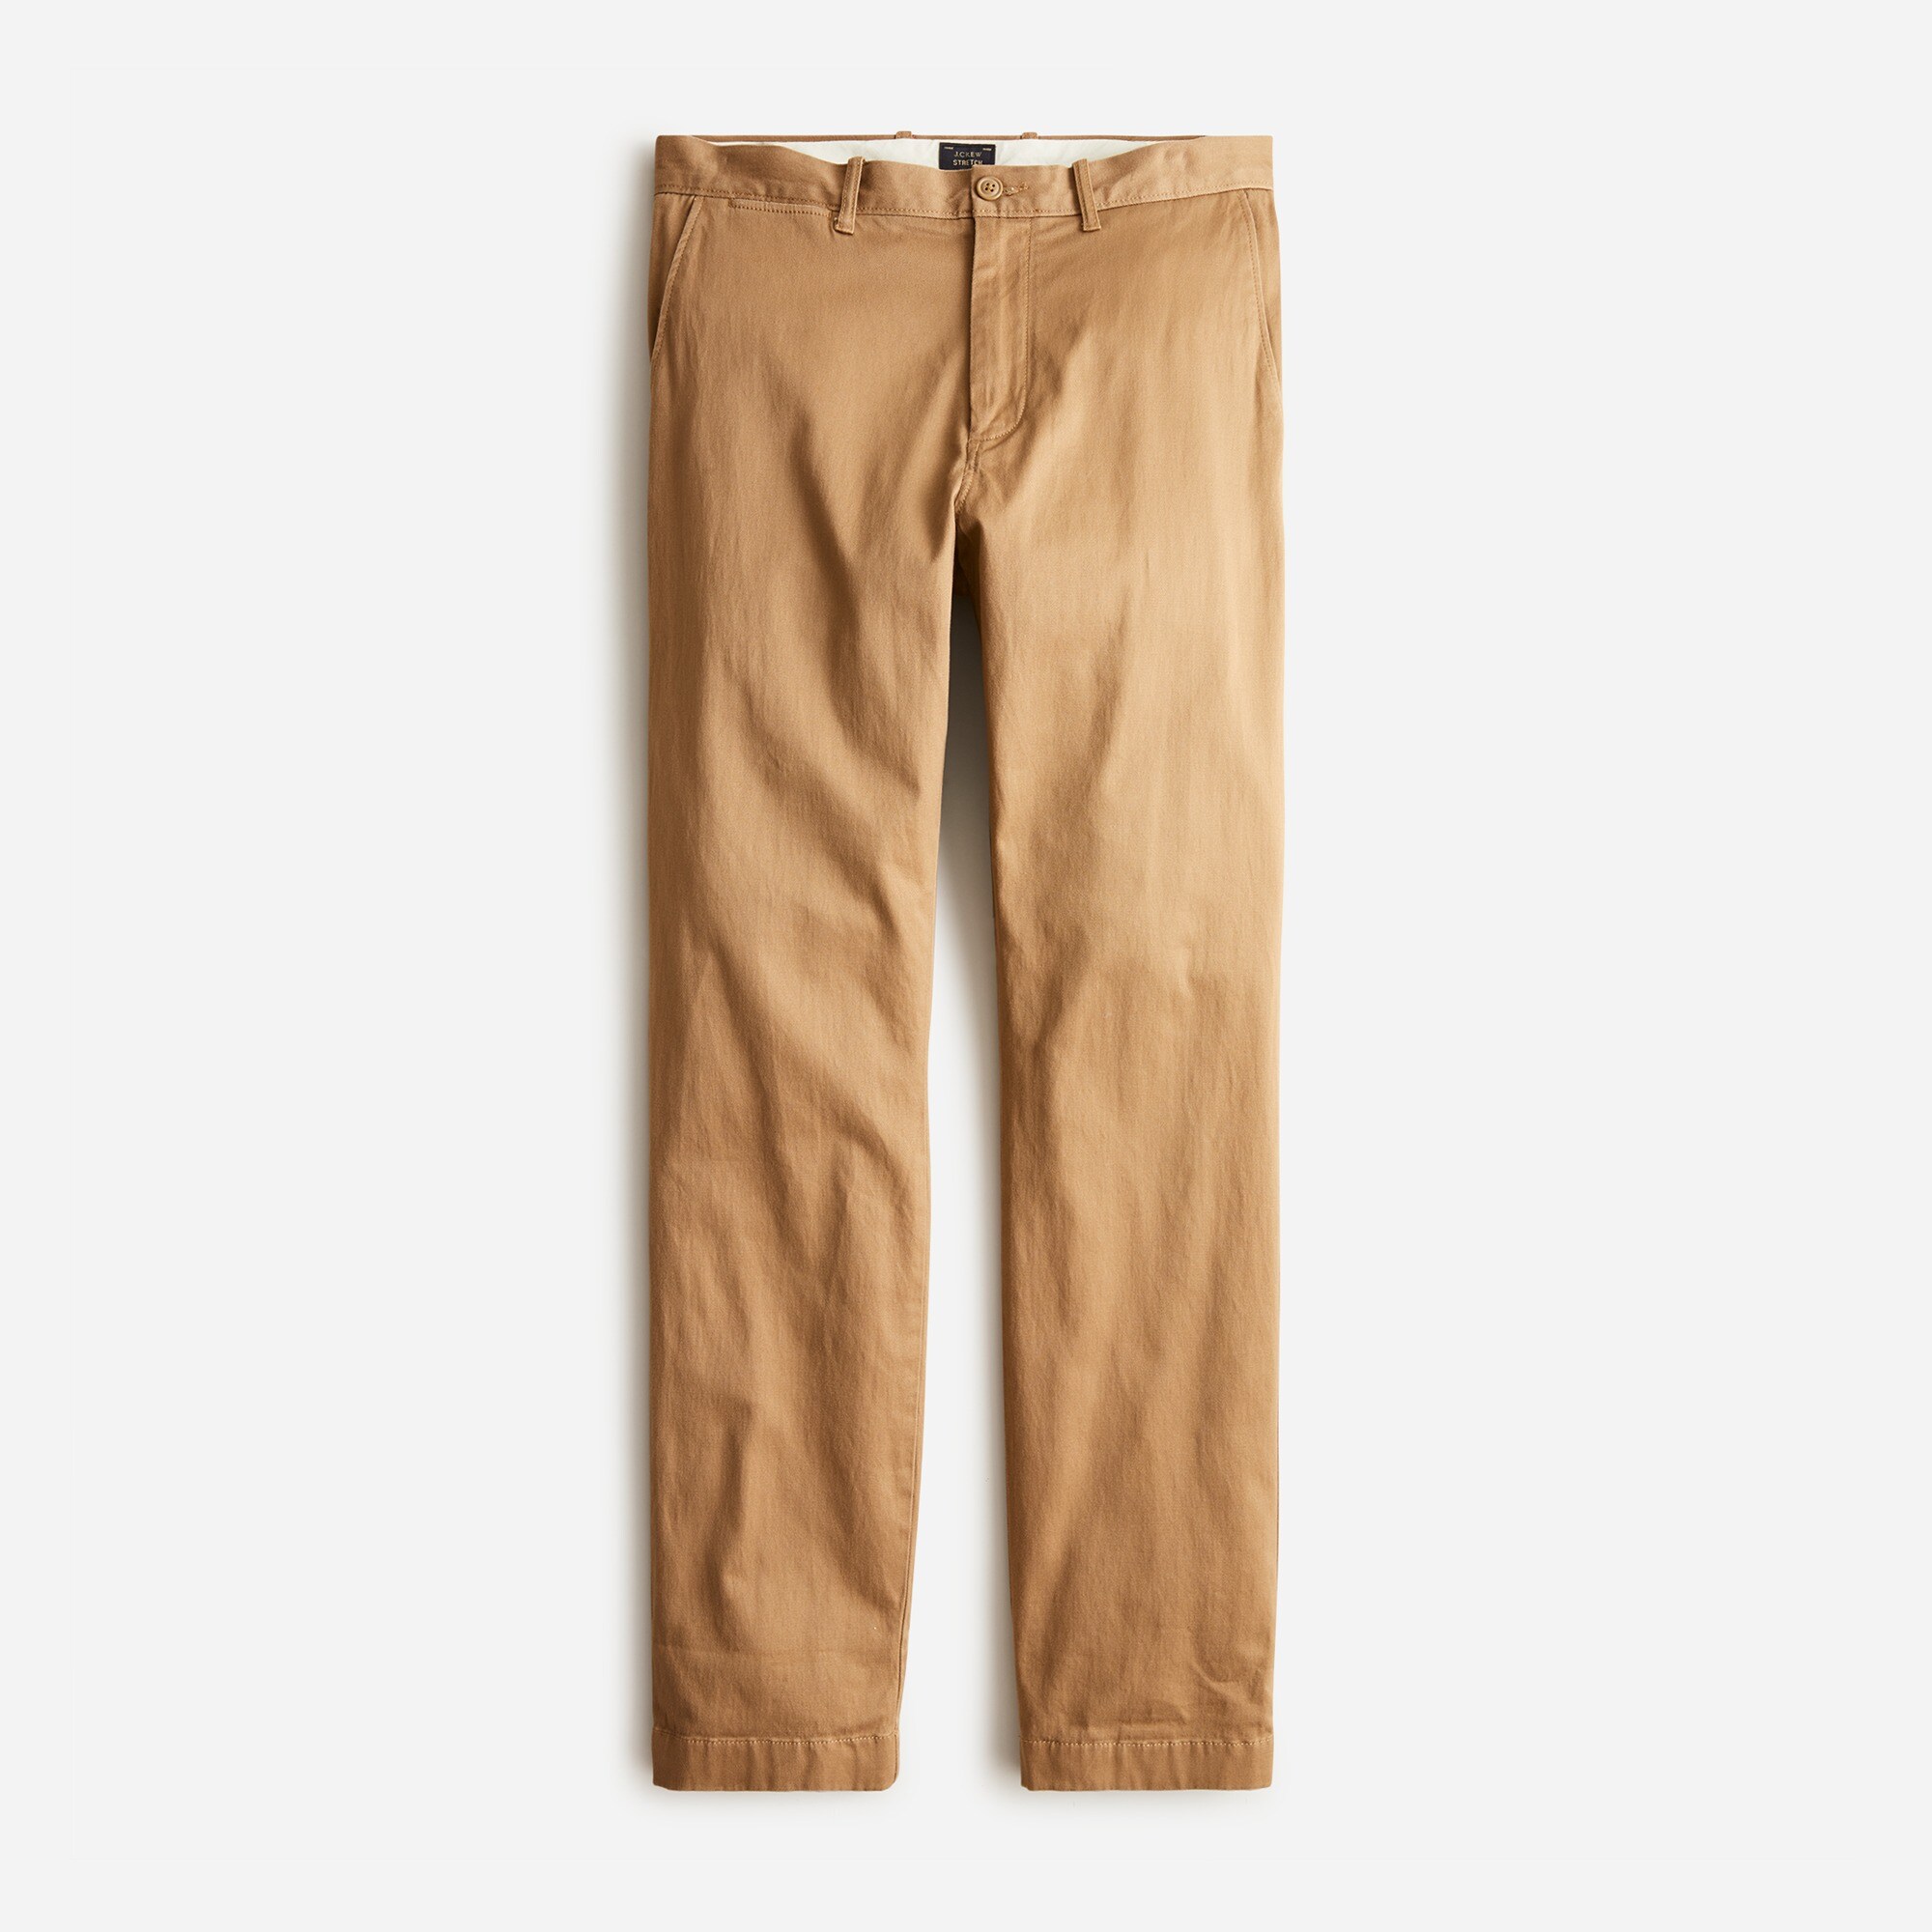  1040 Athletic Tapered-fit stretch chino pant